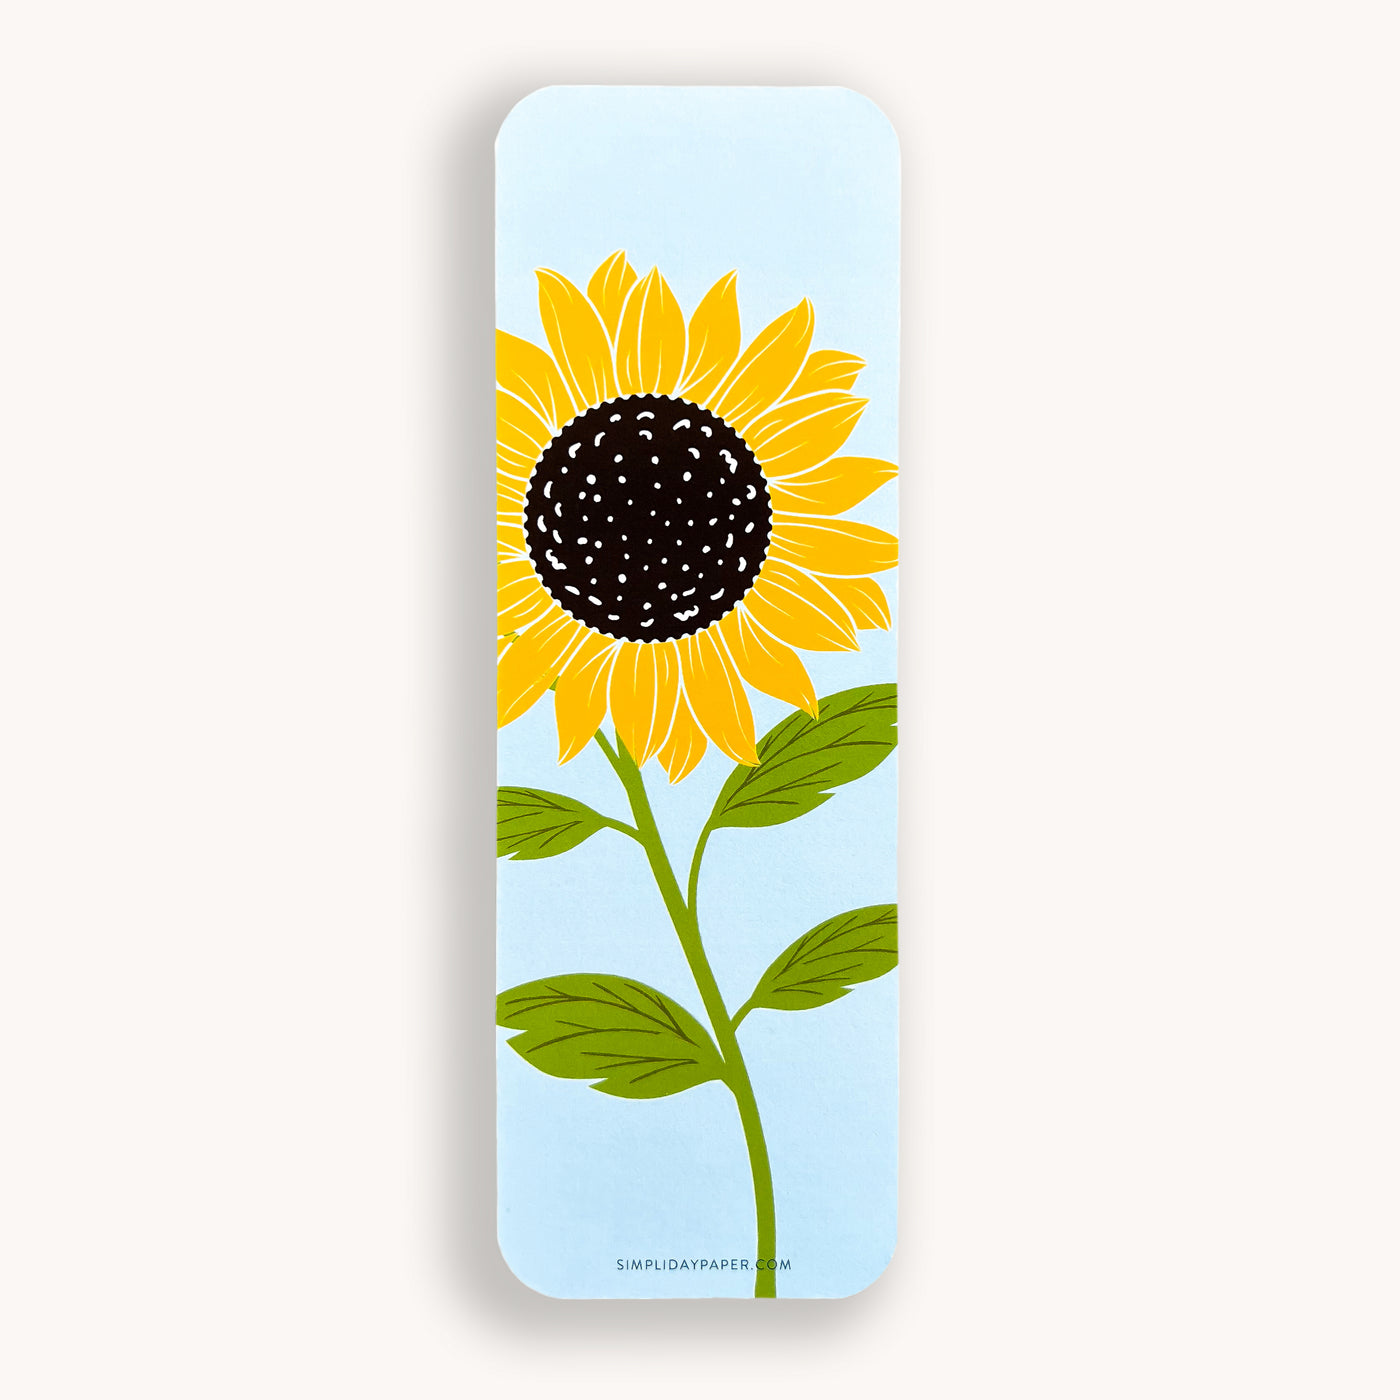 Sunflower on sky blue background bookmark with rounded corners by Simpliday Paper, Olga Nagorna.